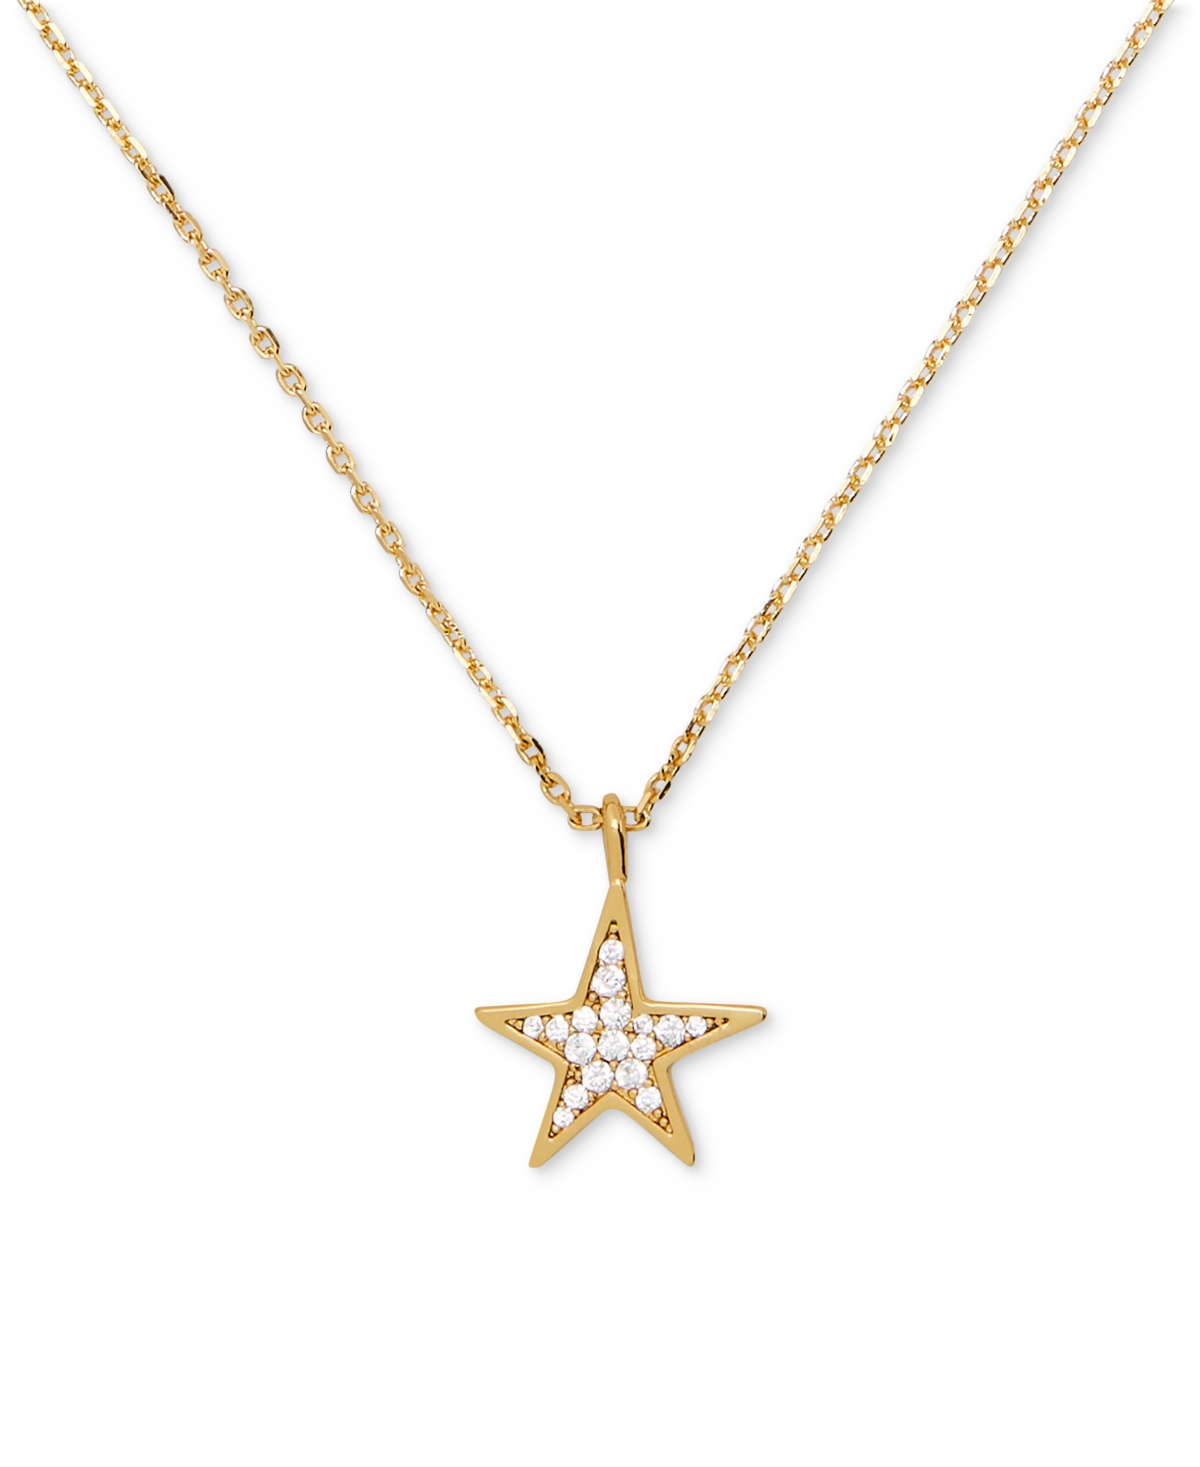 Silver-Tone Pave Star Pendant Necklace, 16" + 3" extender - Clear/silver.